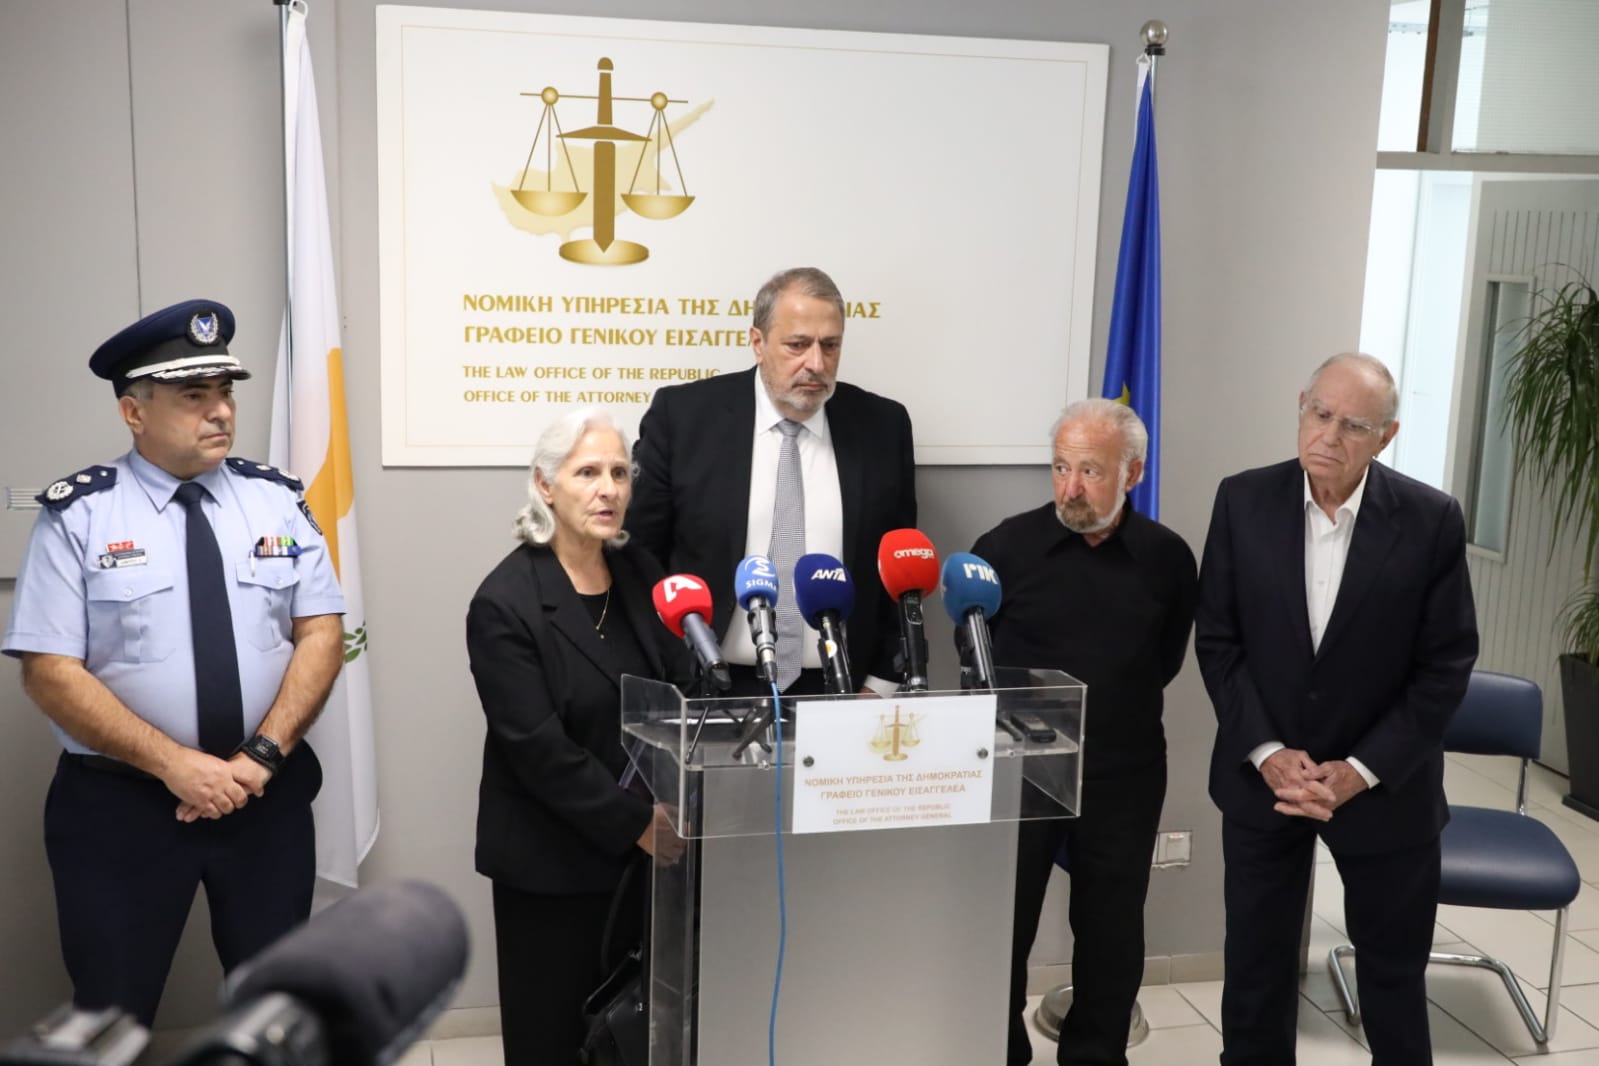 image AG and Thanasis’ parents plead for information over guardsman’s death